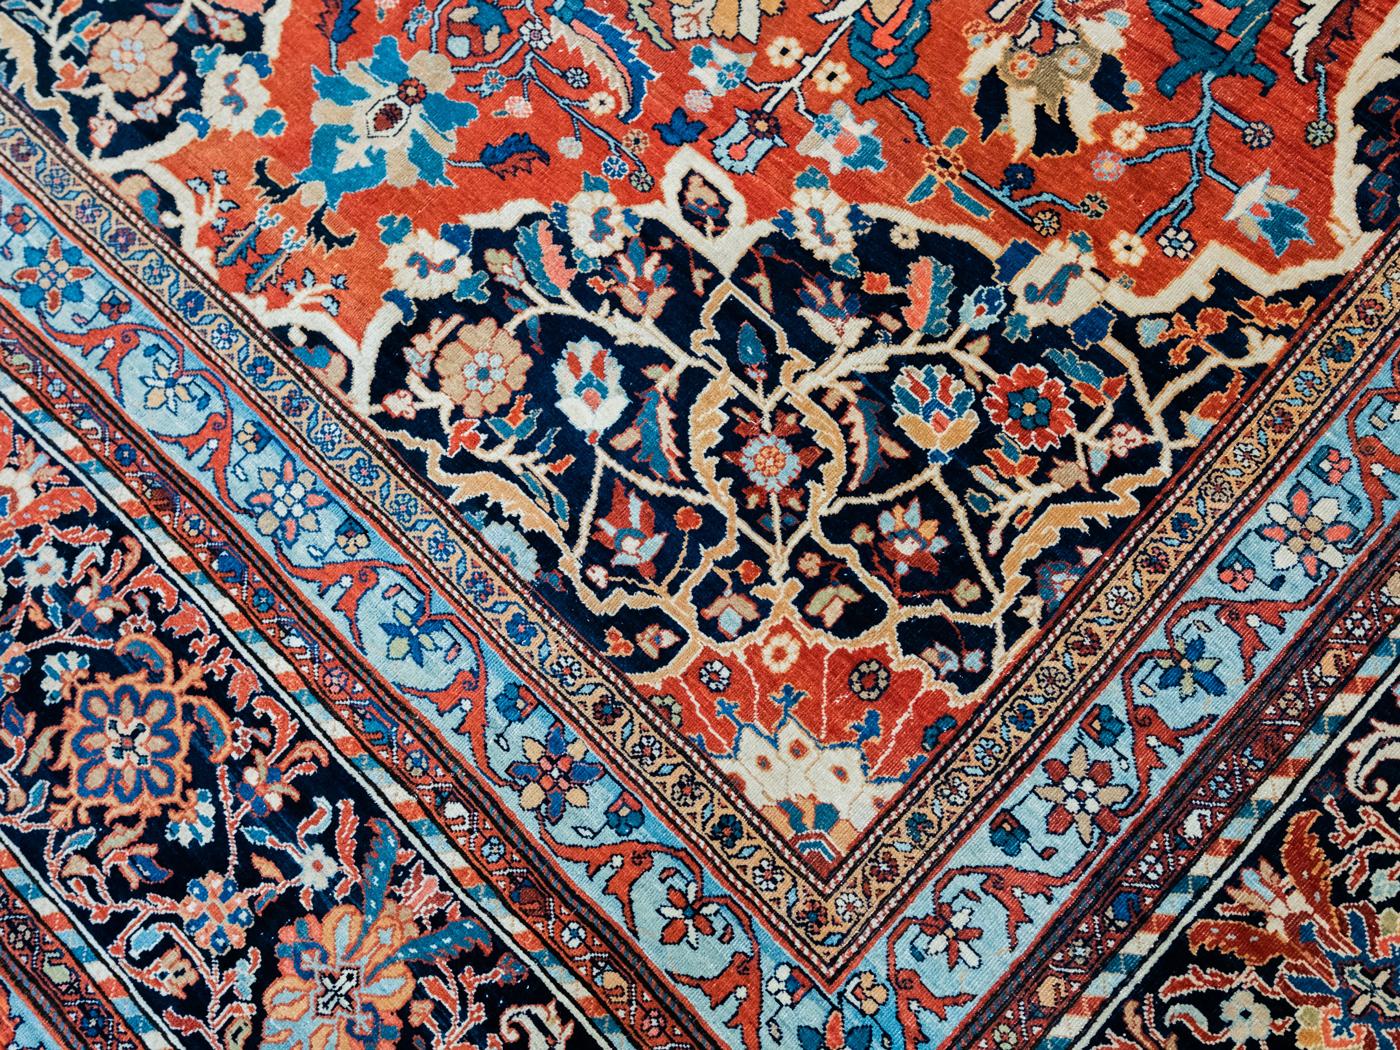 Antique Wool Persian Farahan Carpet, Hand-Knotted, Red, Indigo, Cream, 12’ x 17’ For Sale 2